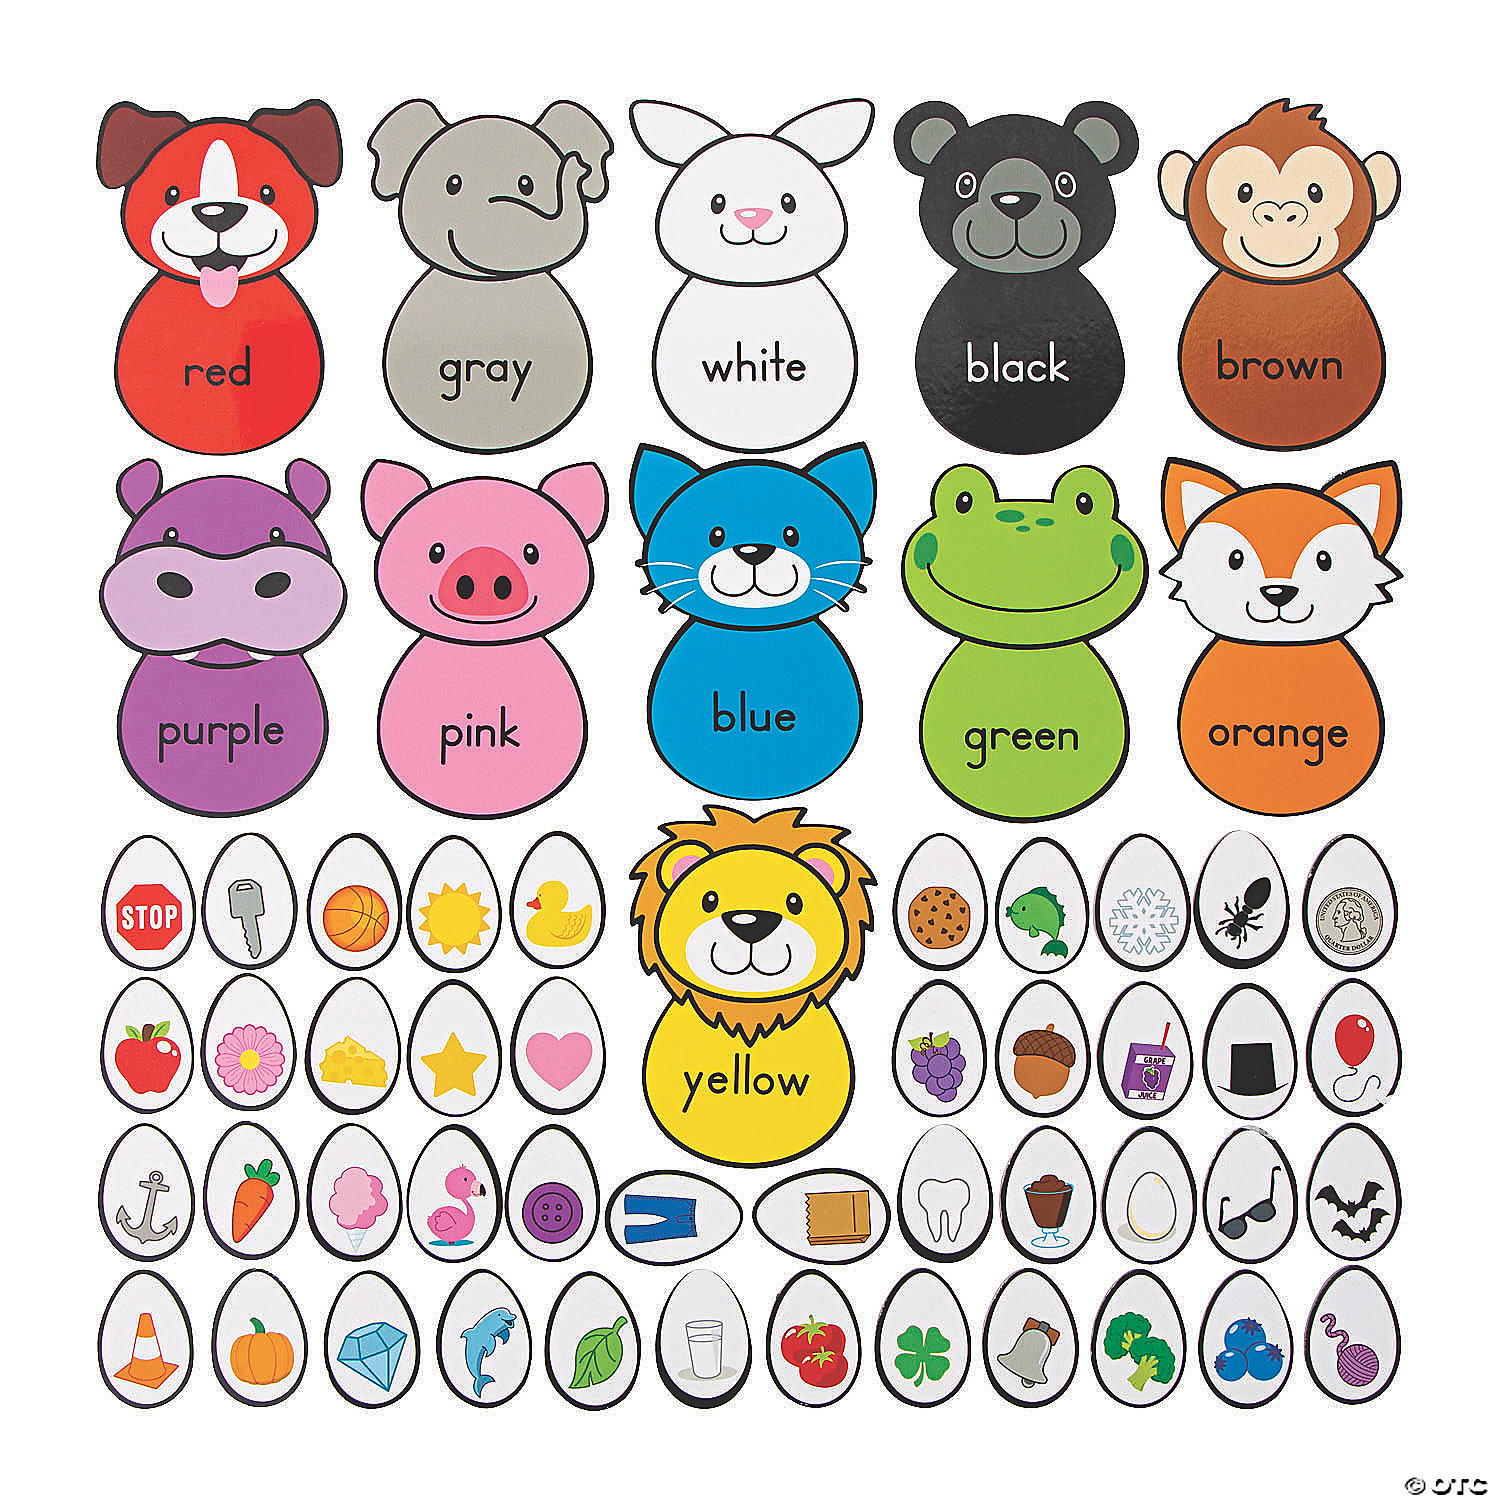 Build an Animal Color Match Game   Oriental Trading